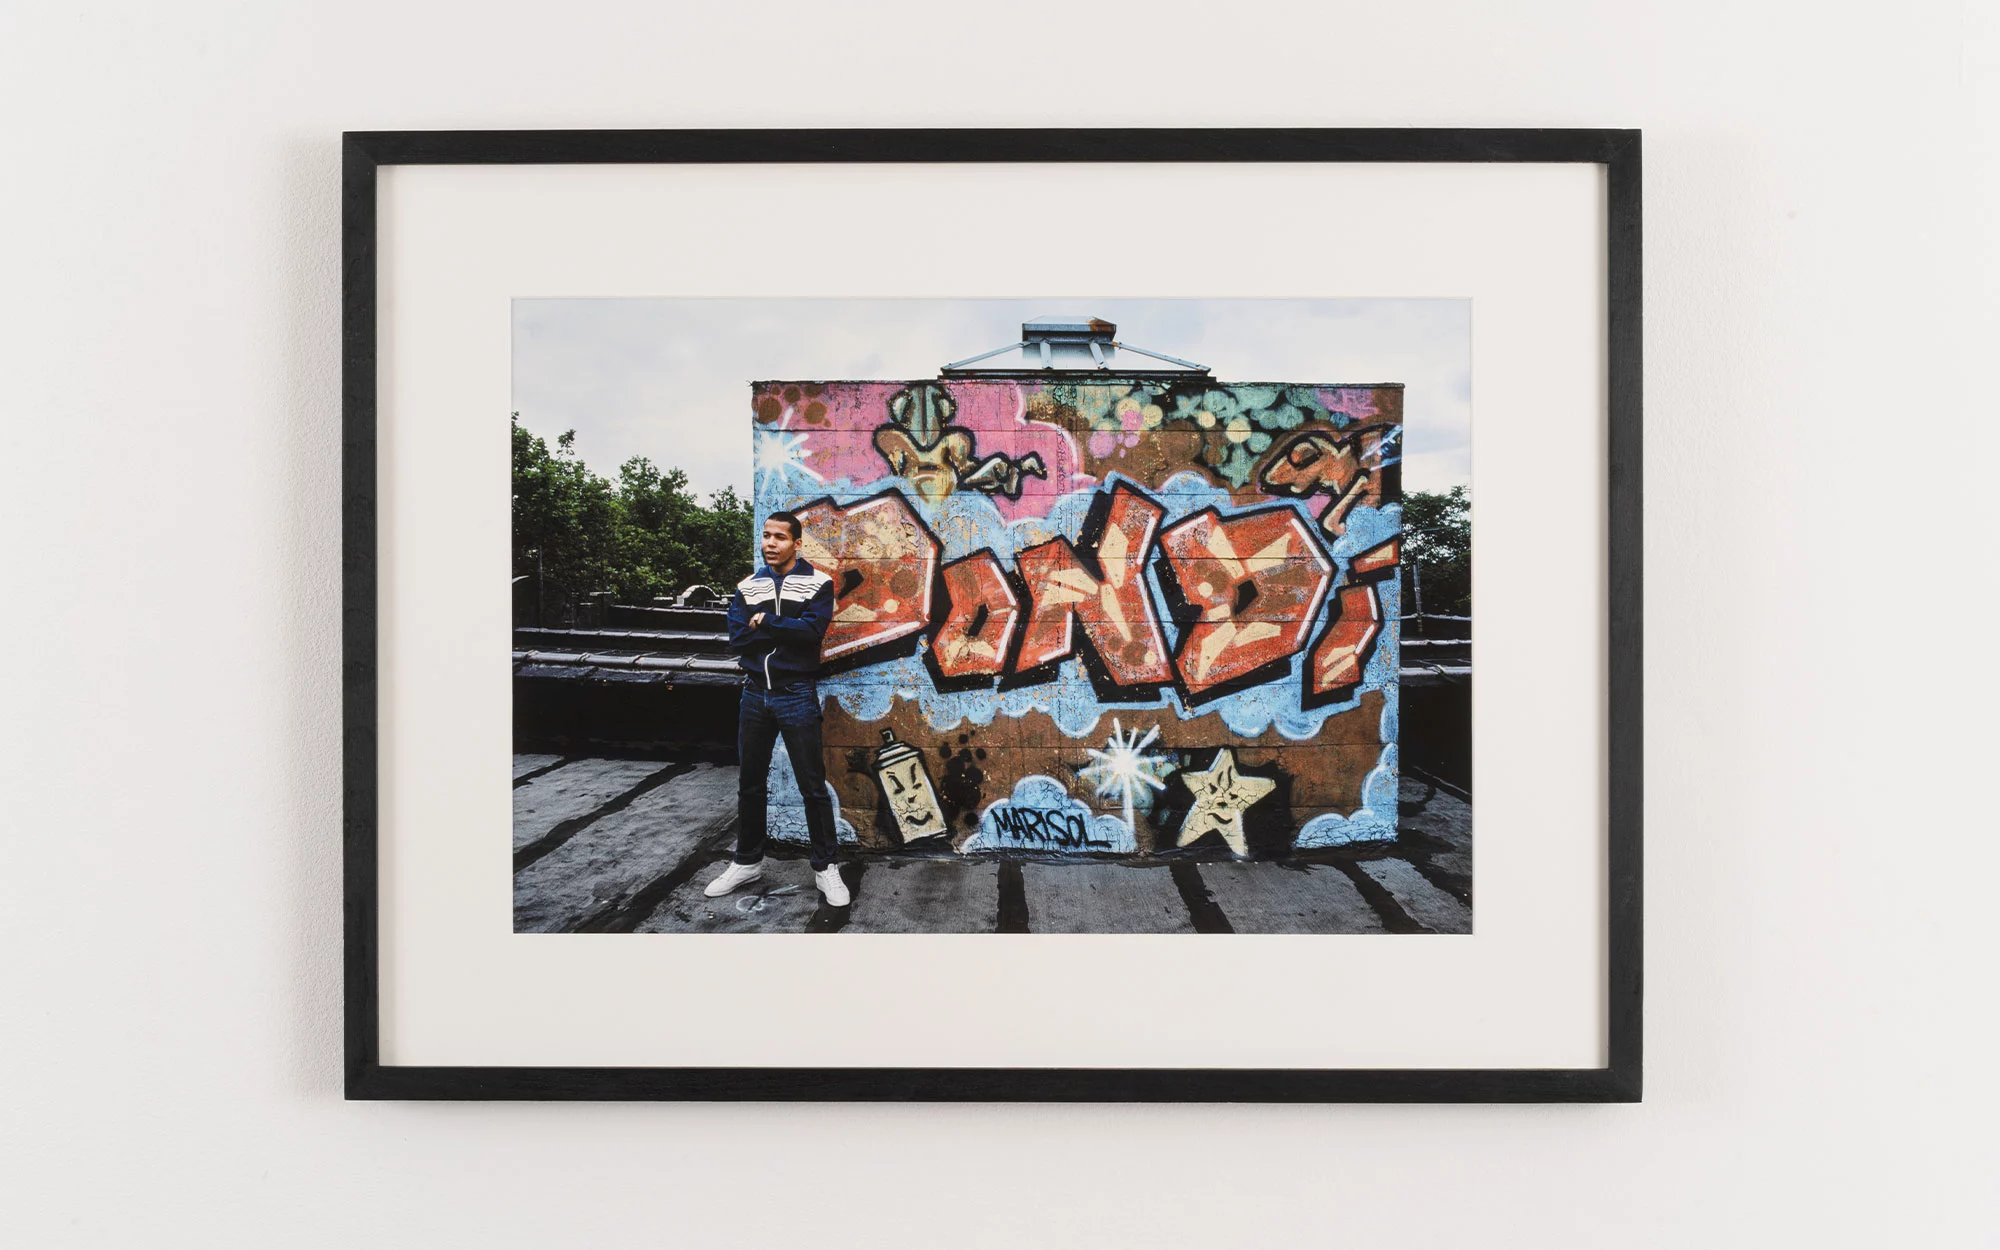 Dondi on his rooftop, NYC  - Bramly - .